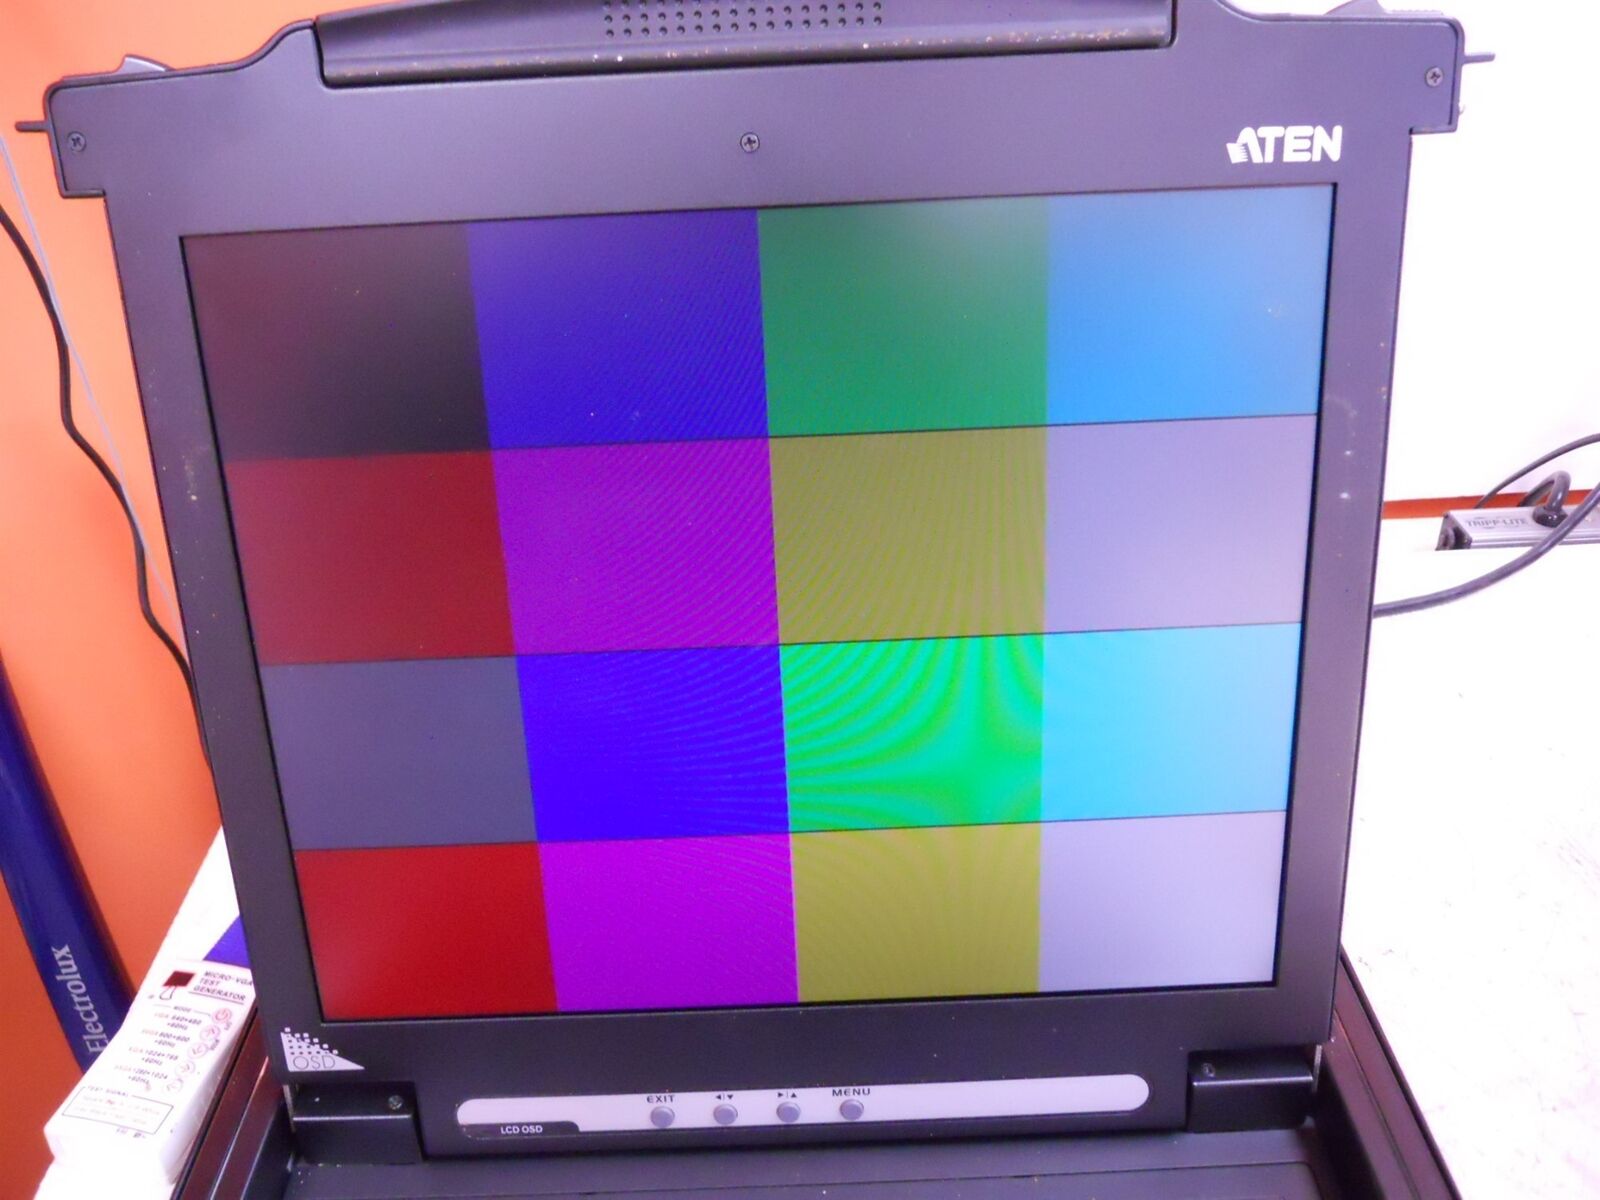 Aten Masterview Max CL1000M-A 17